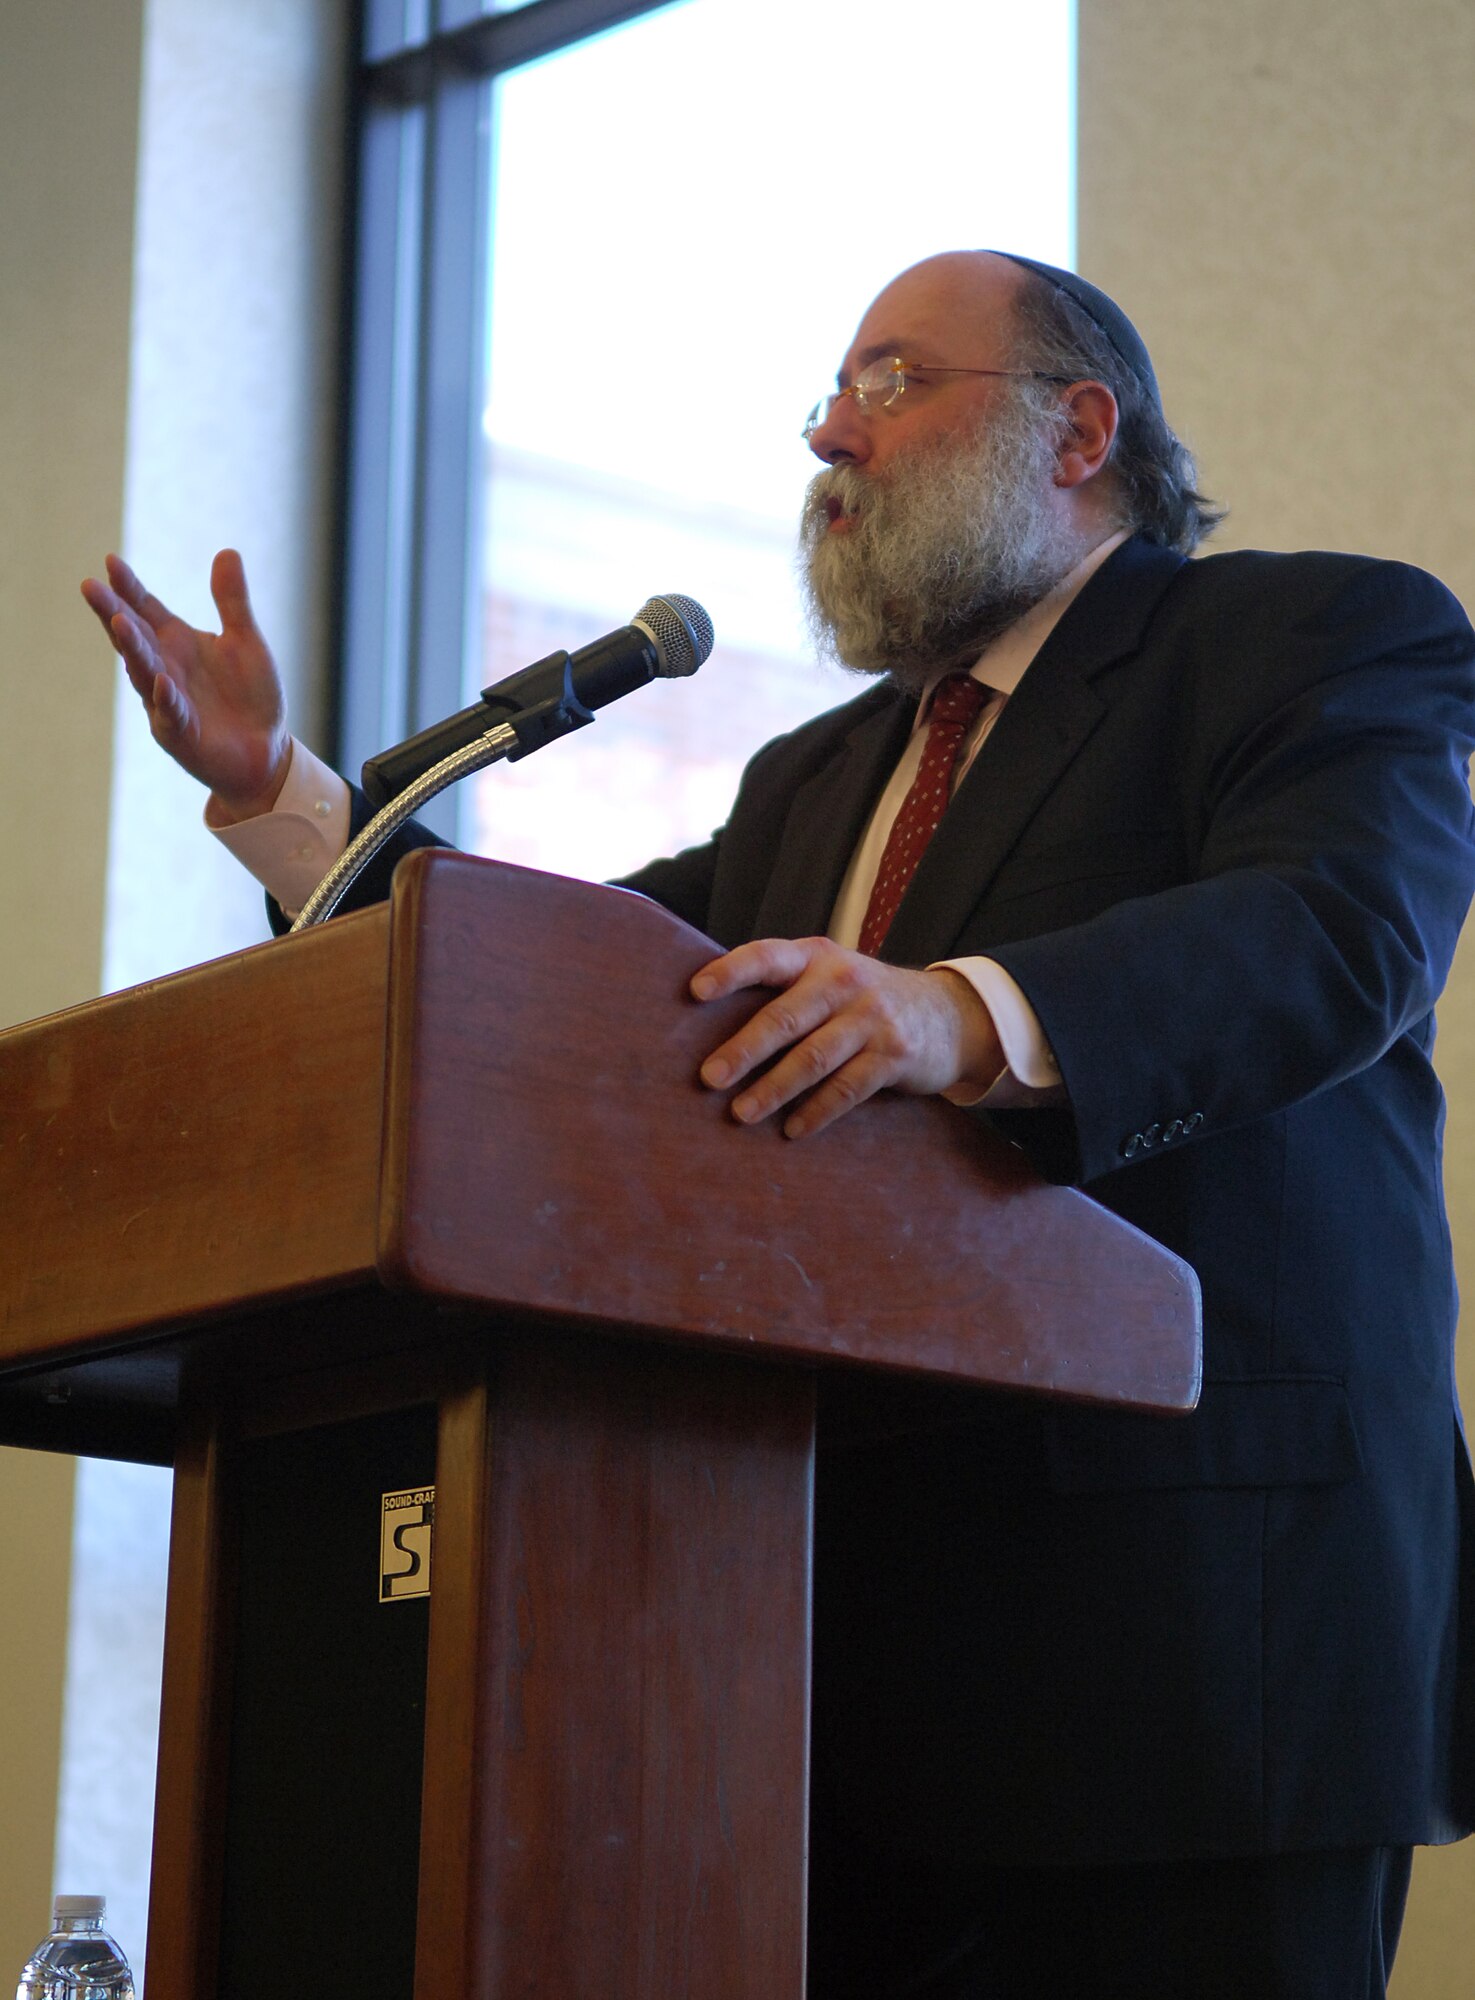 SCOTT AIR FORCE BASE, Ill. -- Rabbi Simon Jacobsen speaks at Scott AFB's National Prayer Luncheon March 4. Rabbi Jacobsen is the director of the Meaningful Life Center in Manhattan, N.Y. and the author of the bestselling book called "Toward a Meaningful Life" (U.S. Air Force photo by Senior Airman Ryan Crane) 